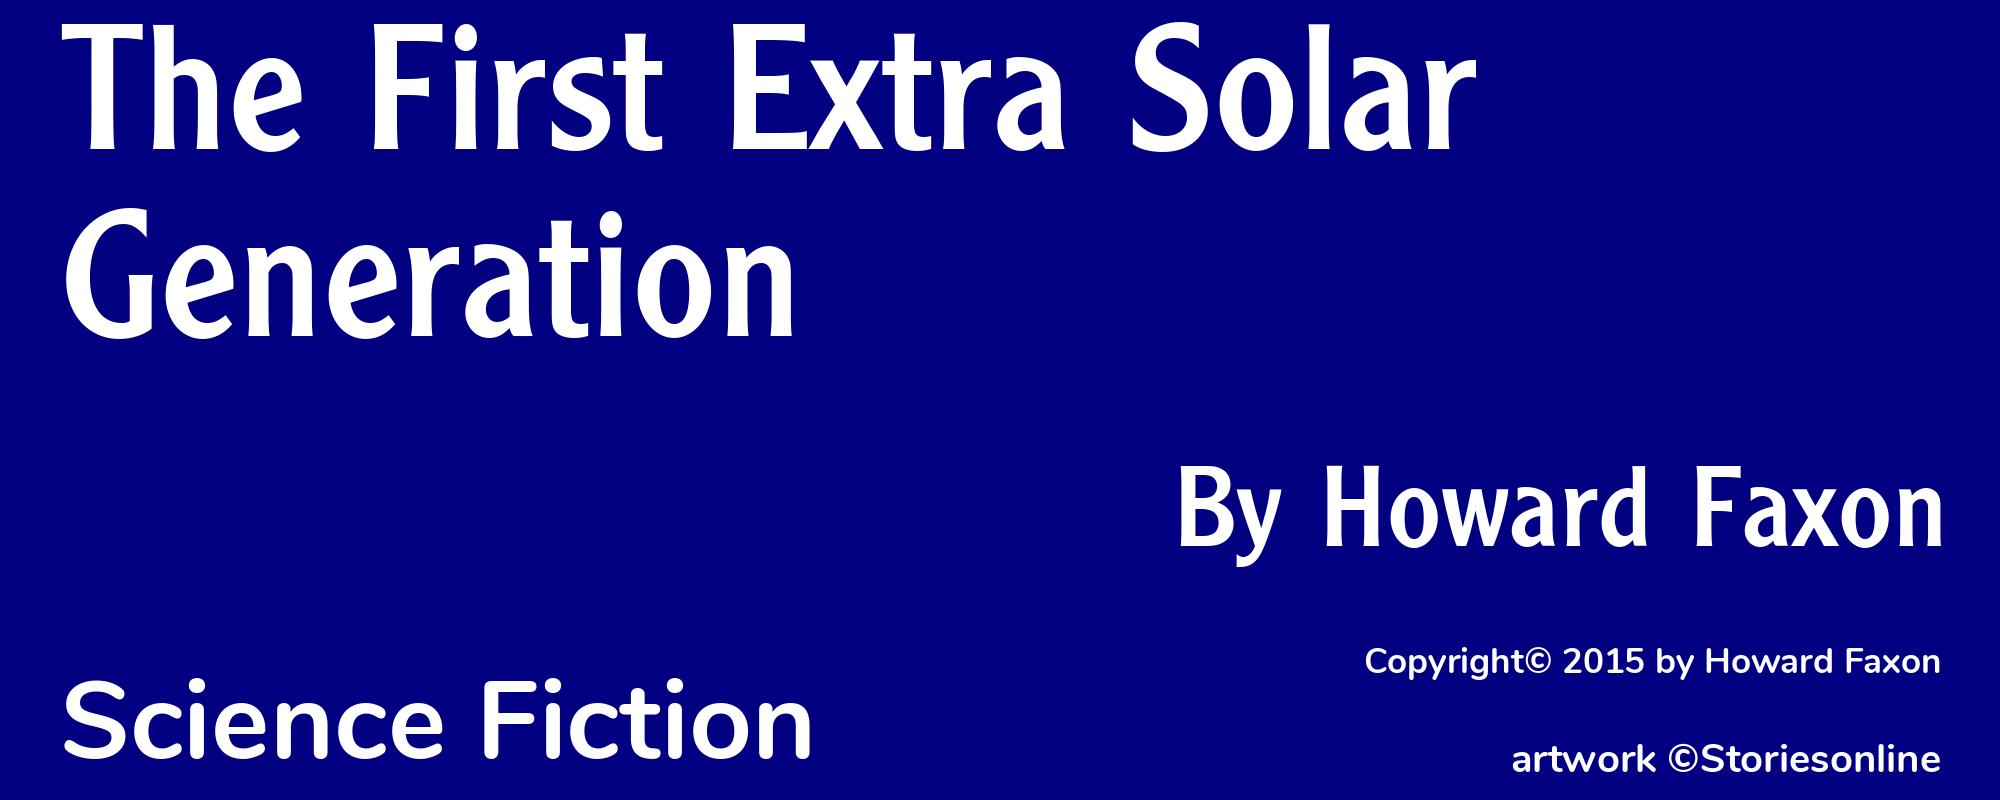 The First Extra Solar Generation - Cover